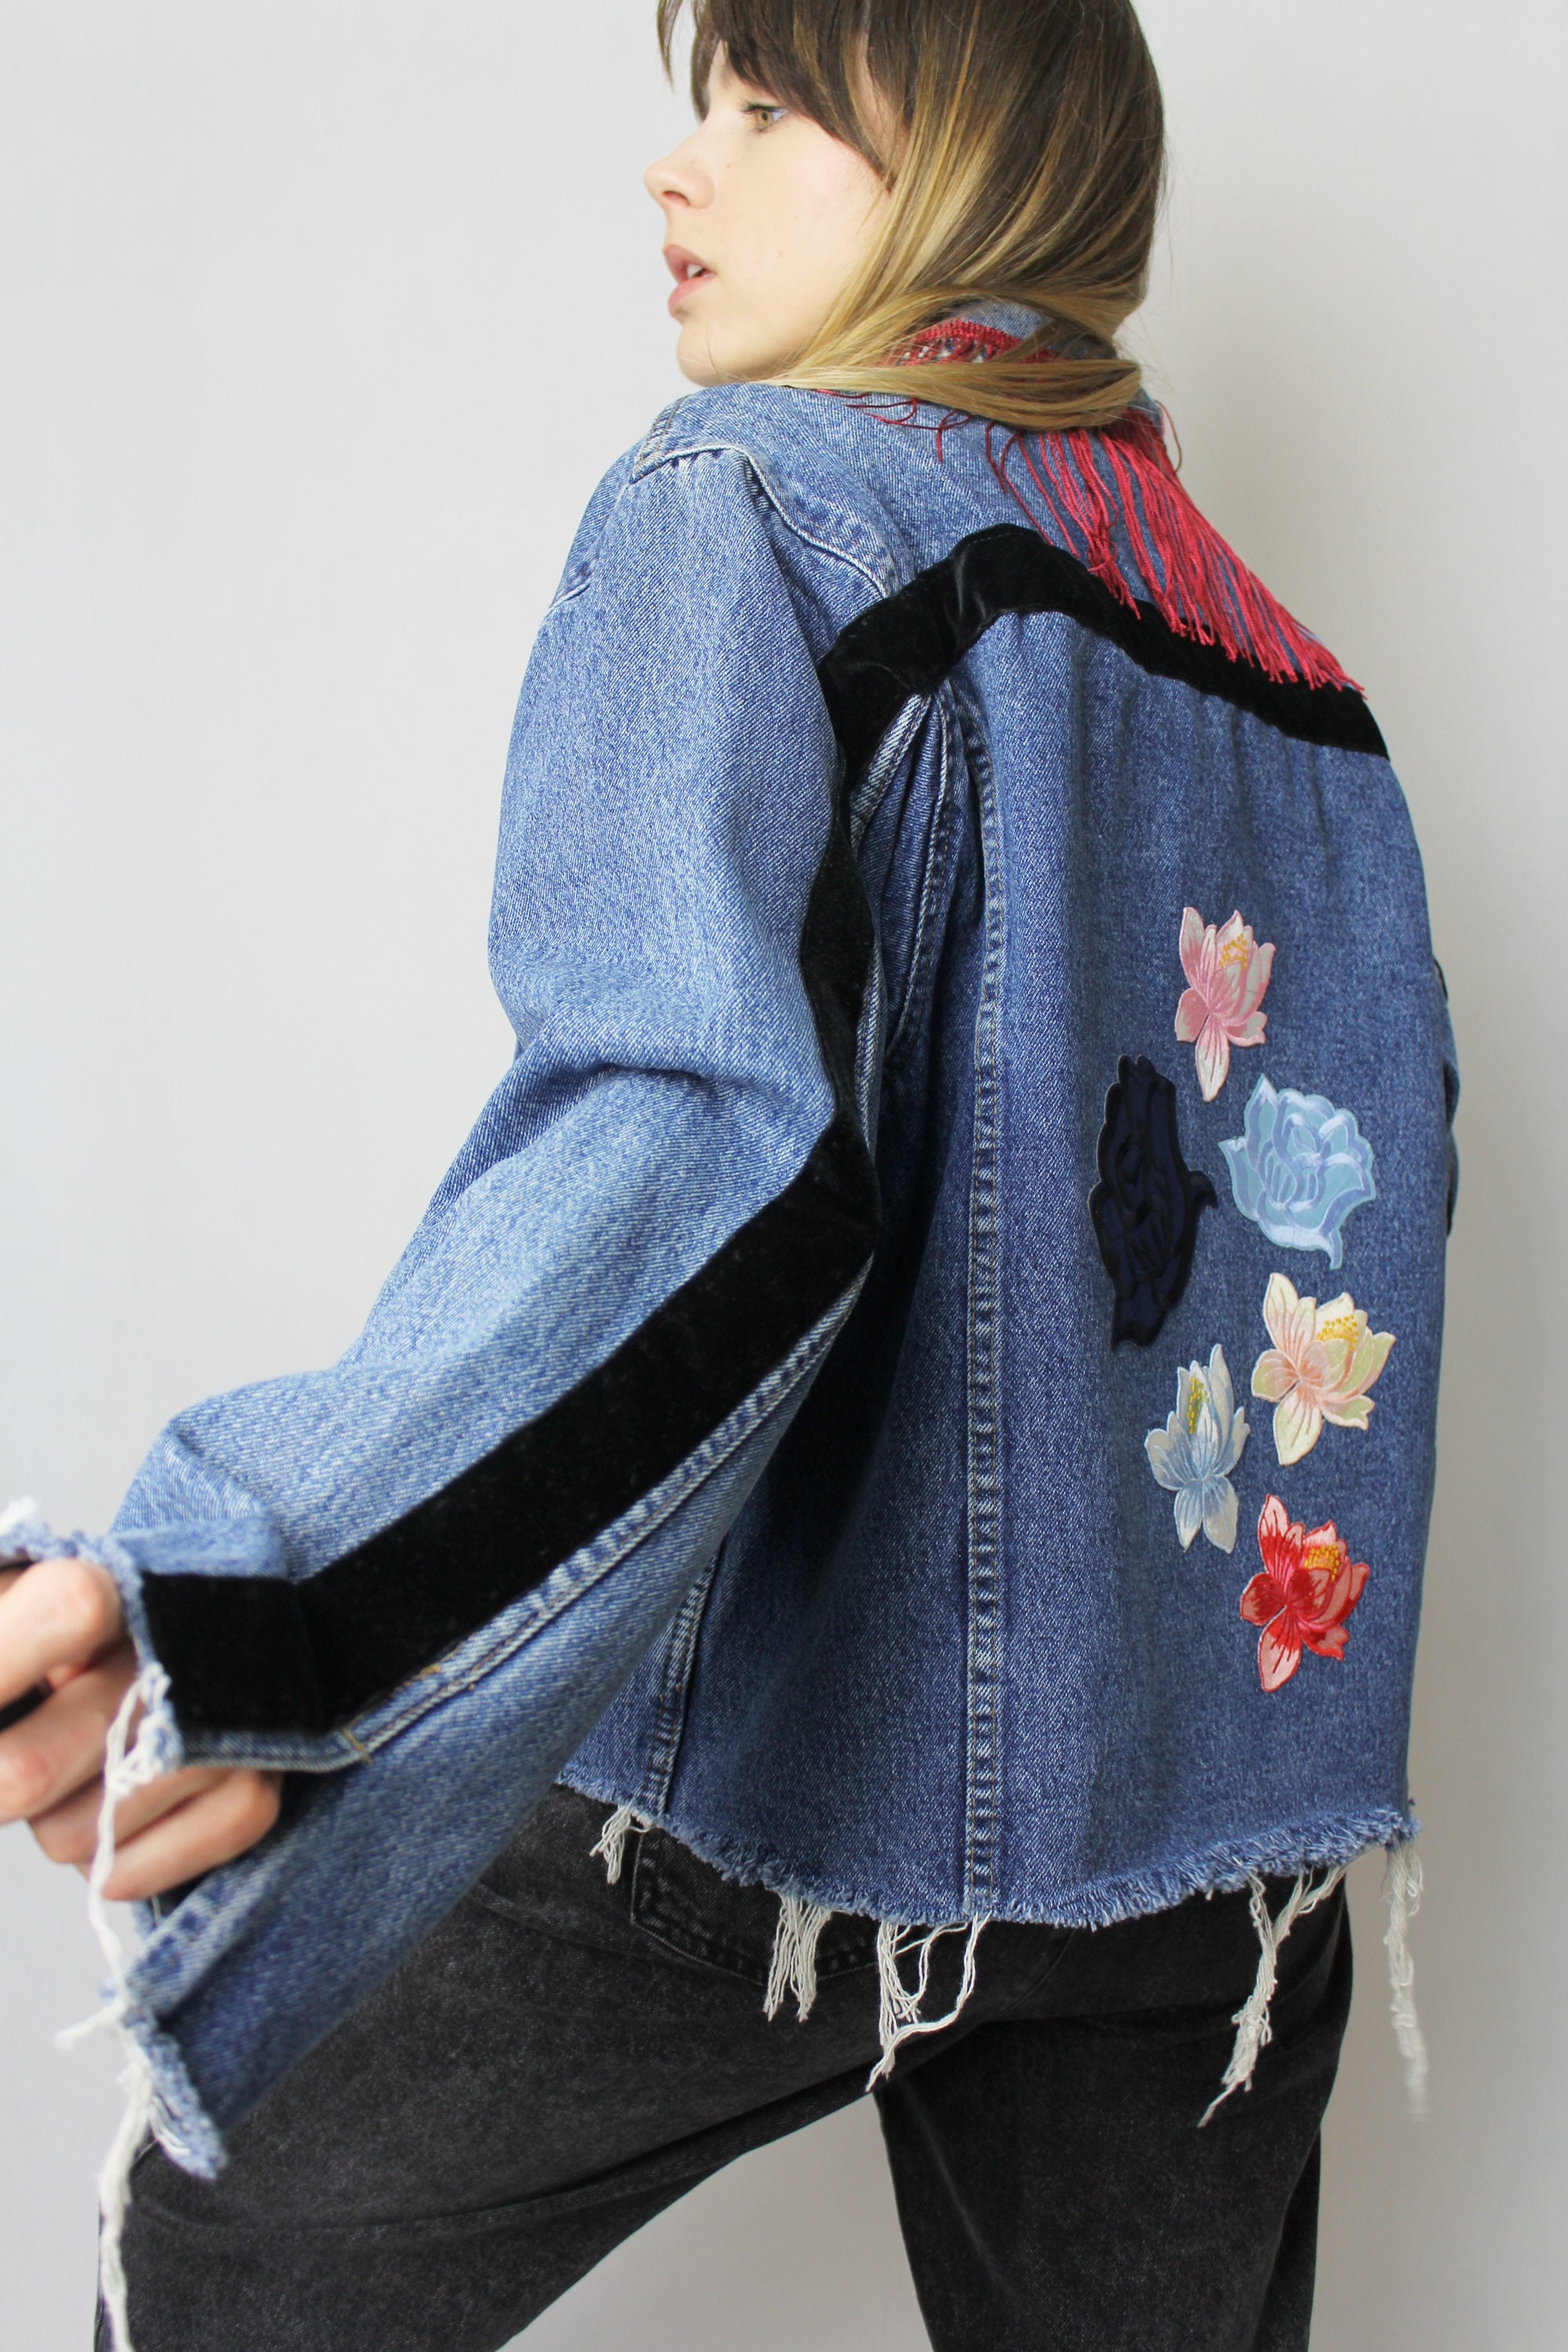 Frayed Denim Jacket With Flower Patches and Fringed Collar - Etsy